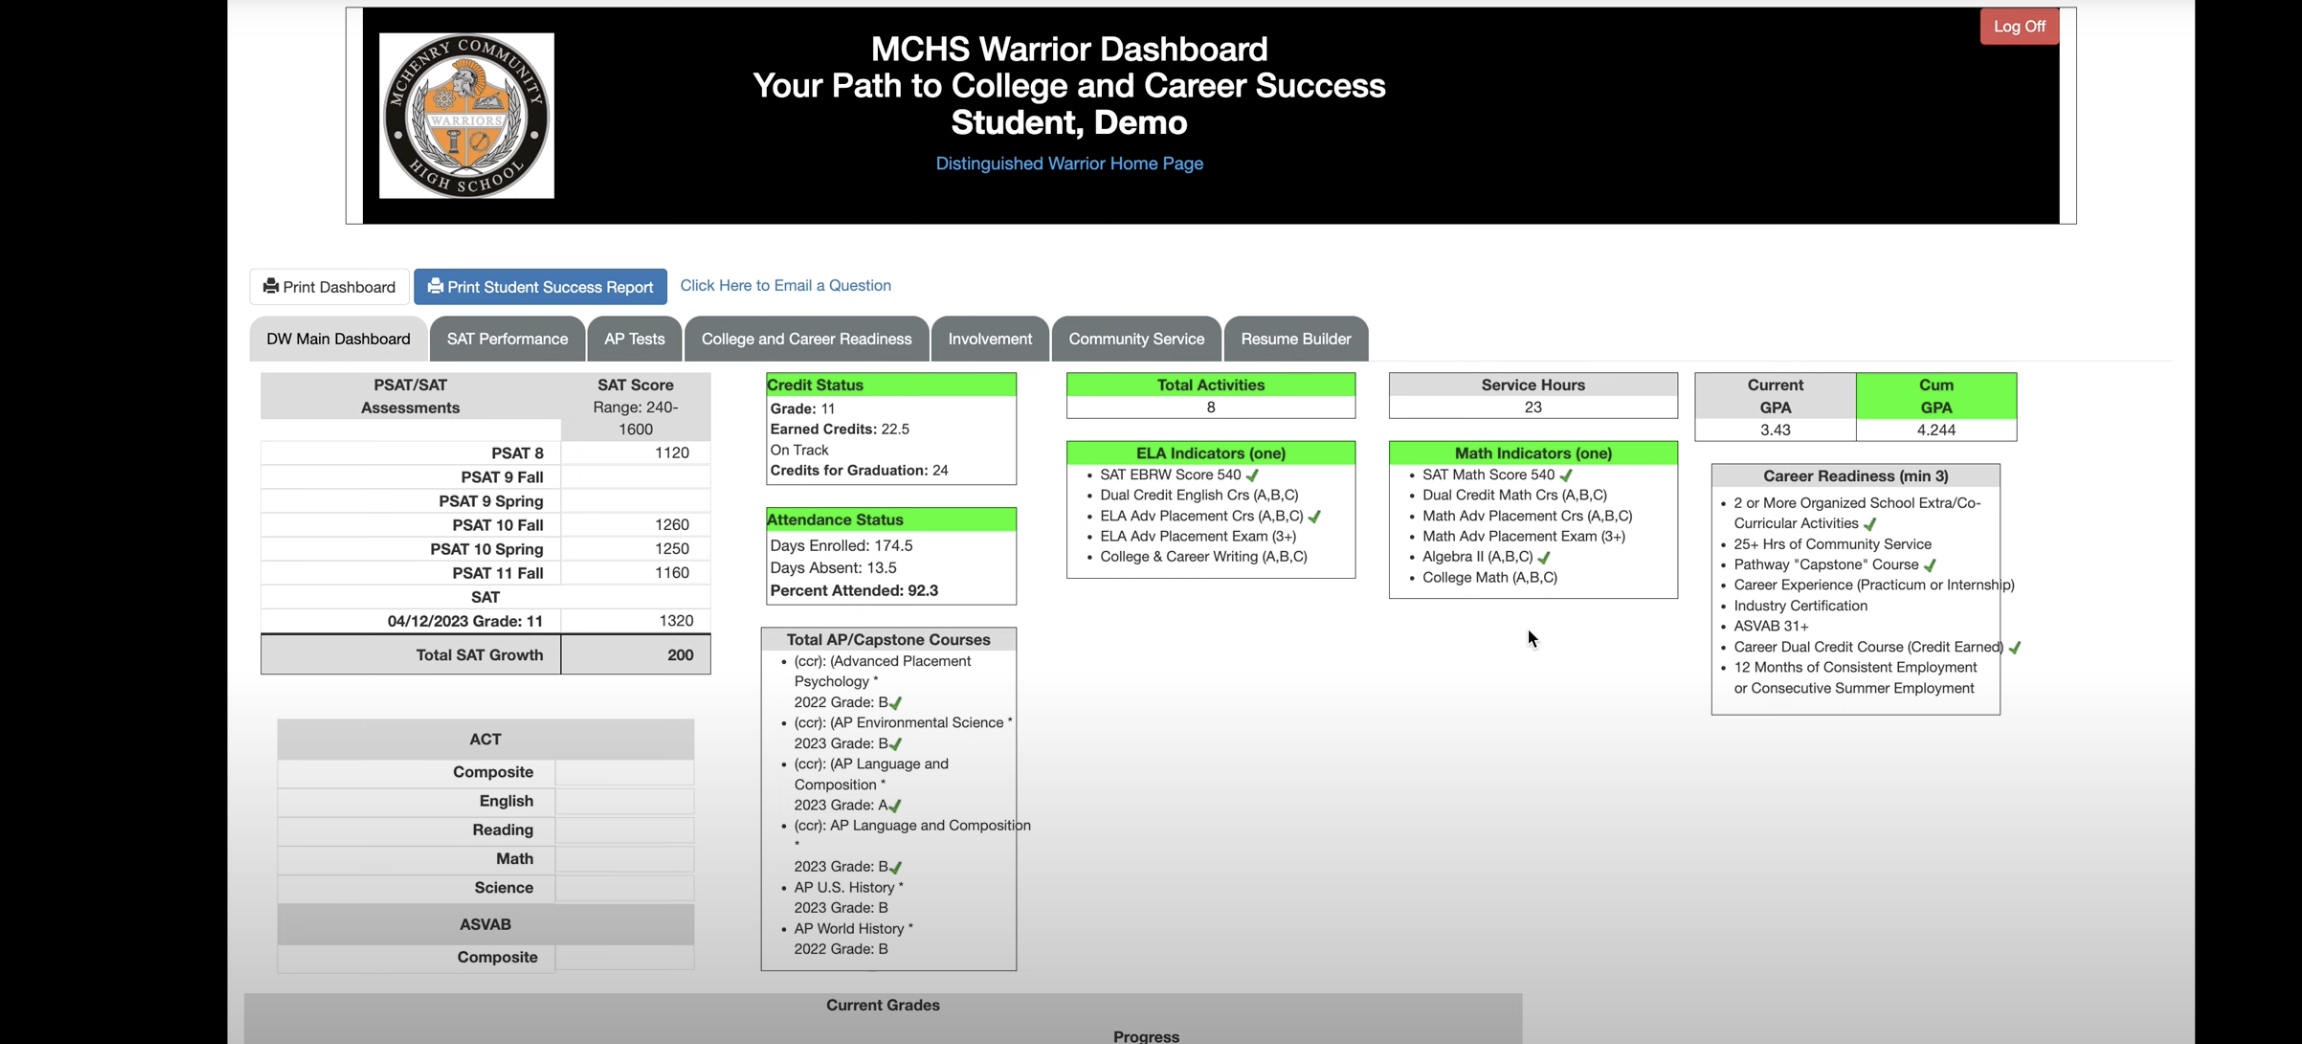 An example of what the Warrior Dashboard looks like.